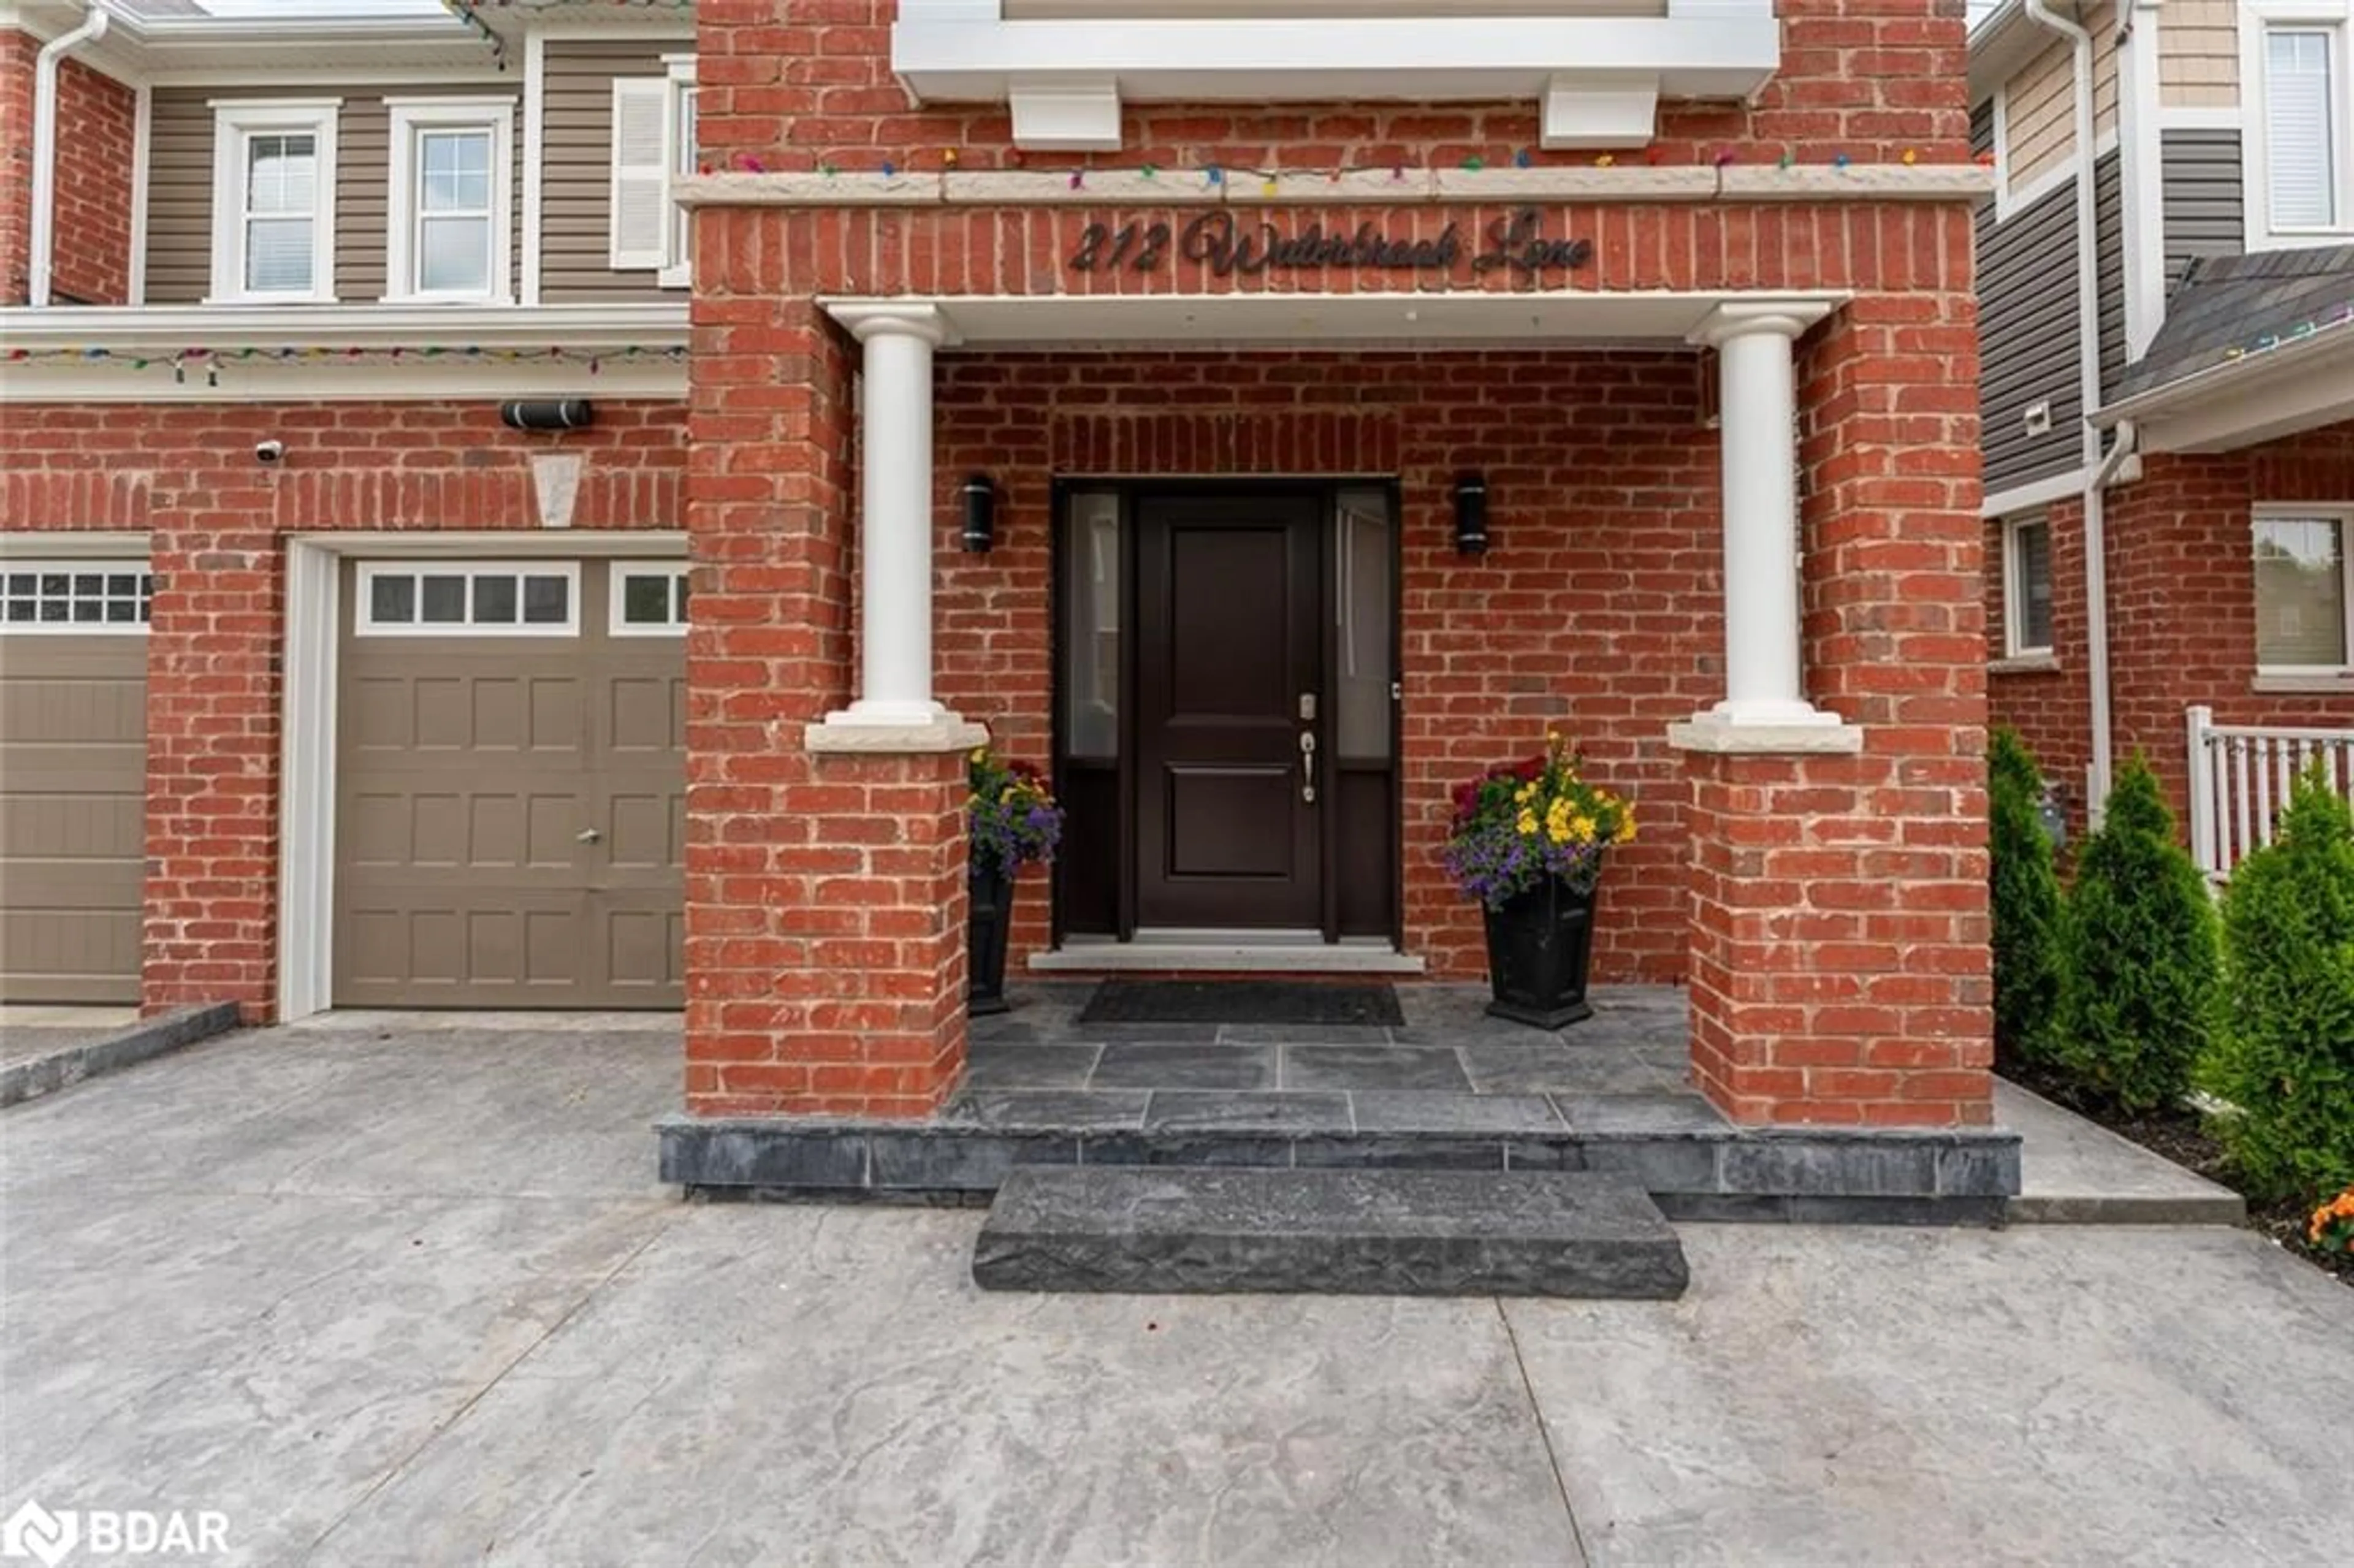 Home with brick exterior material for 212 Waterbrook Lane, Kitchener Ontario N2P 2X6